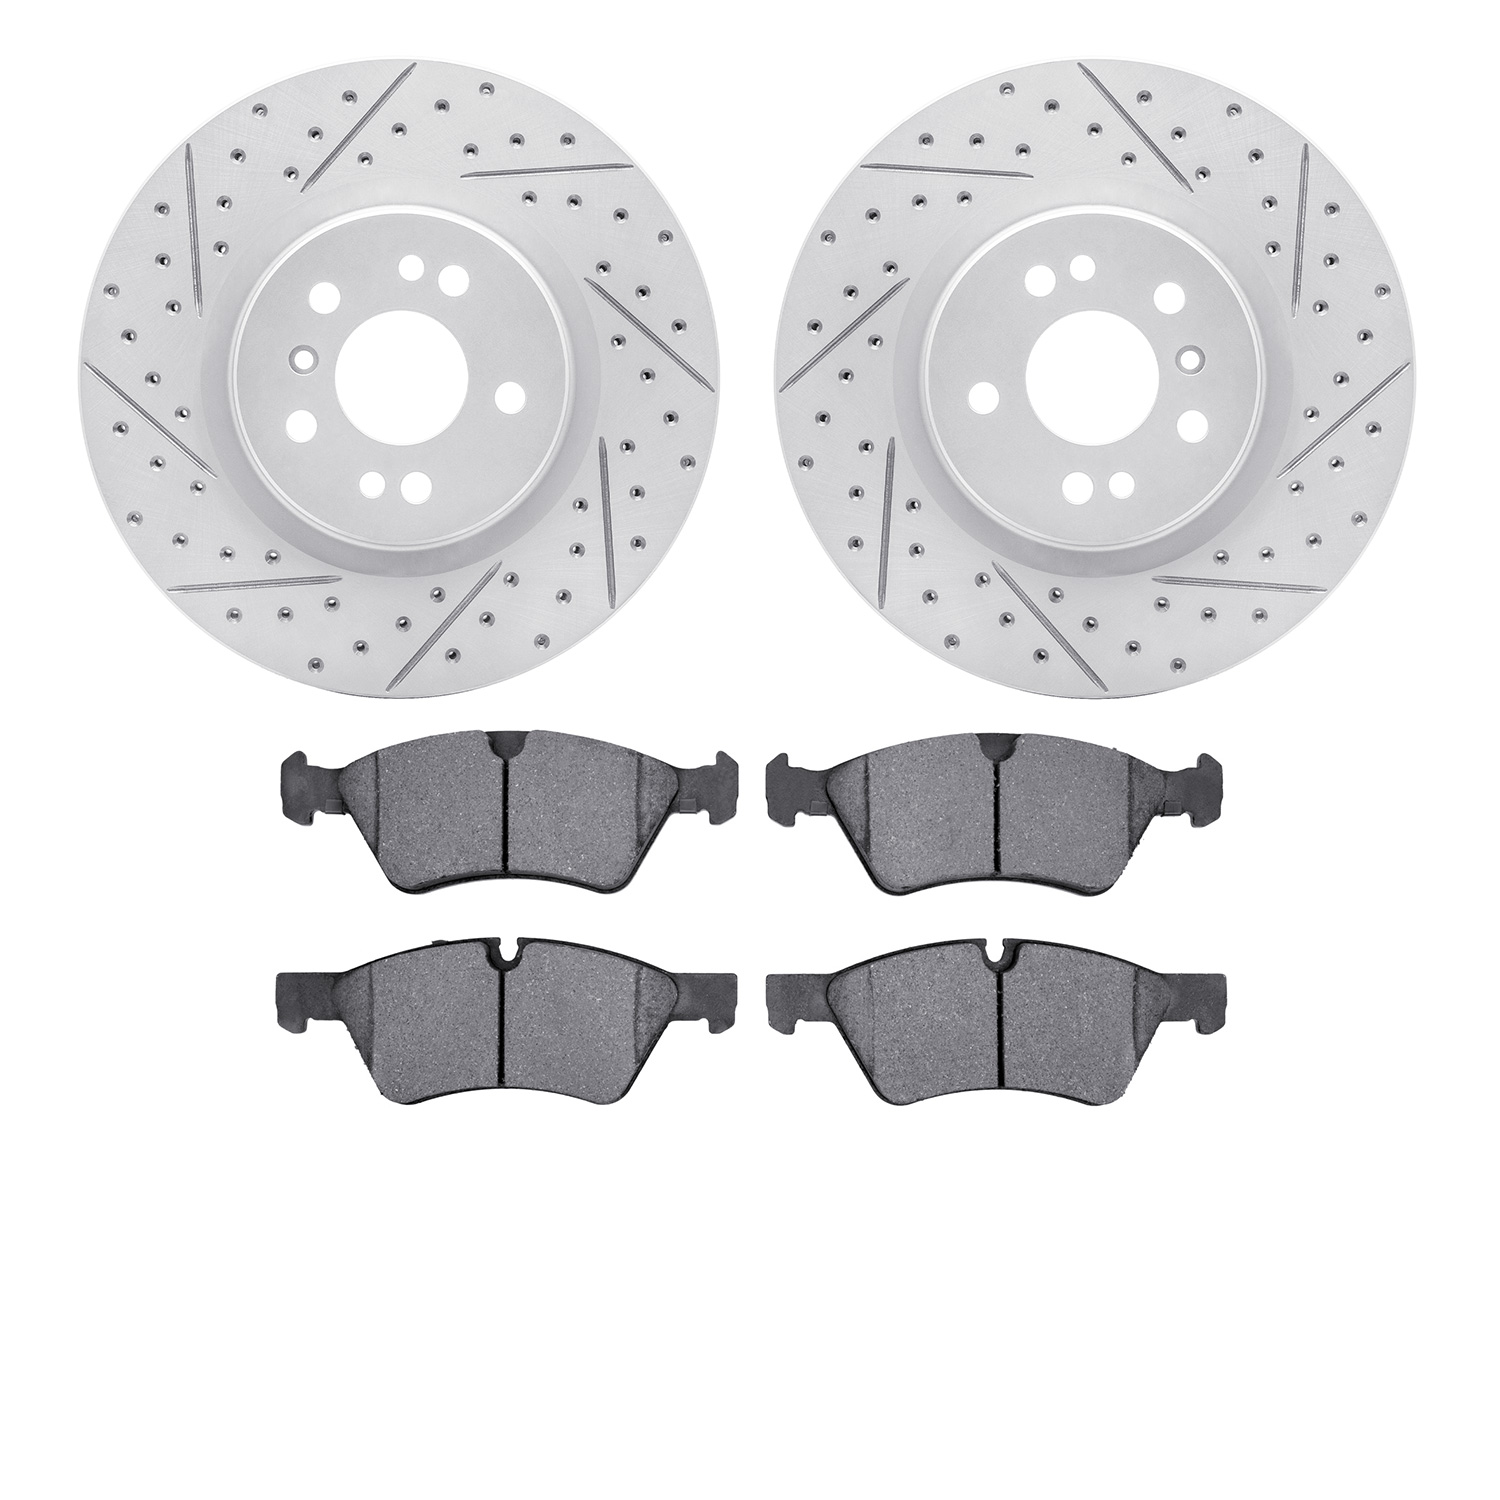 2502-63054 Geoperformance Drilled/Slotted Rotors w/5000 Advanced Brake Pads Kit, 2006-2012 Mercedes-Benz, Position: Front